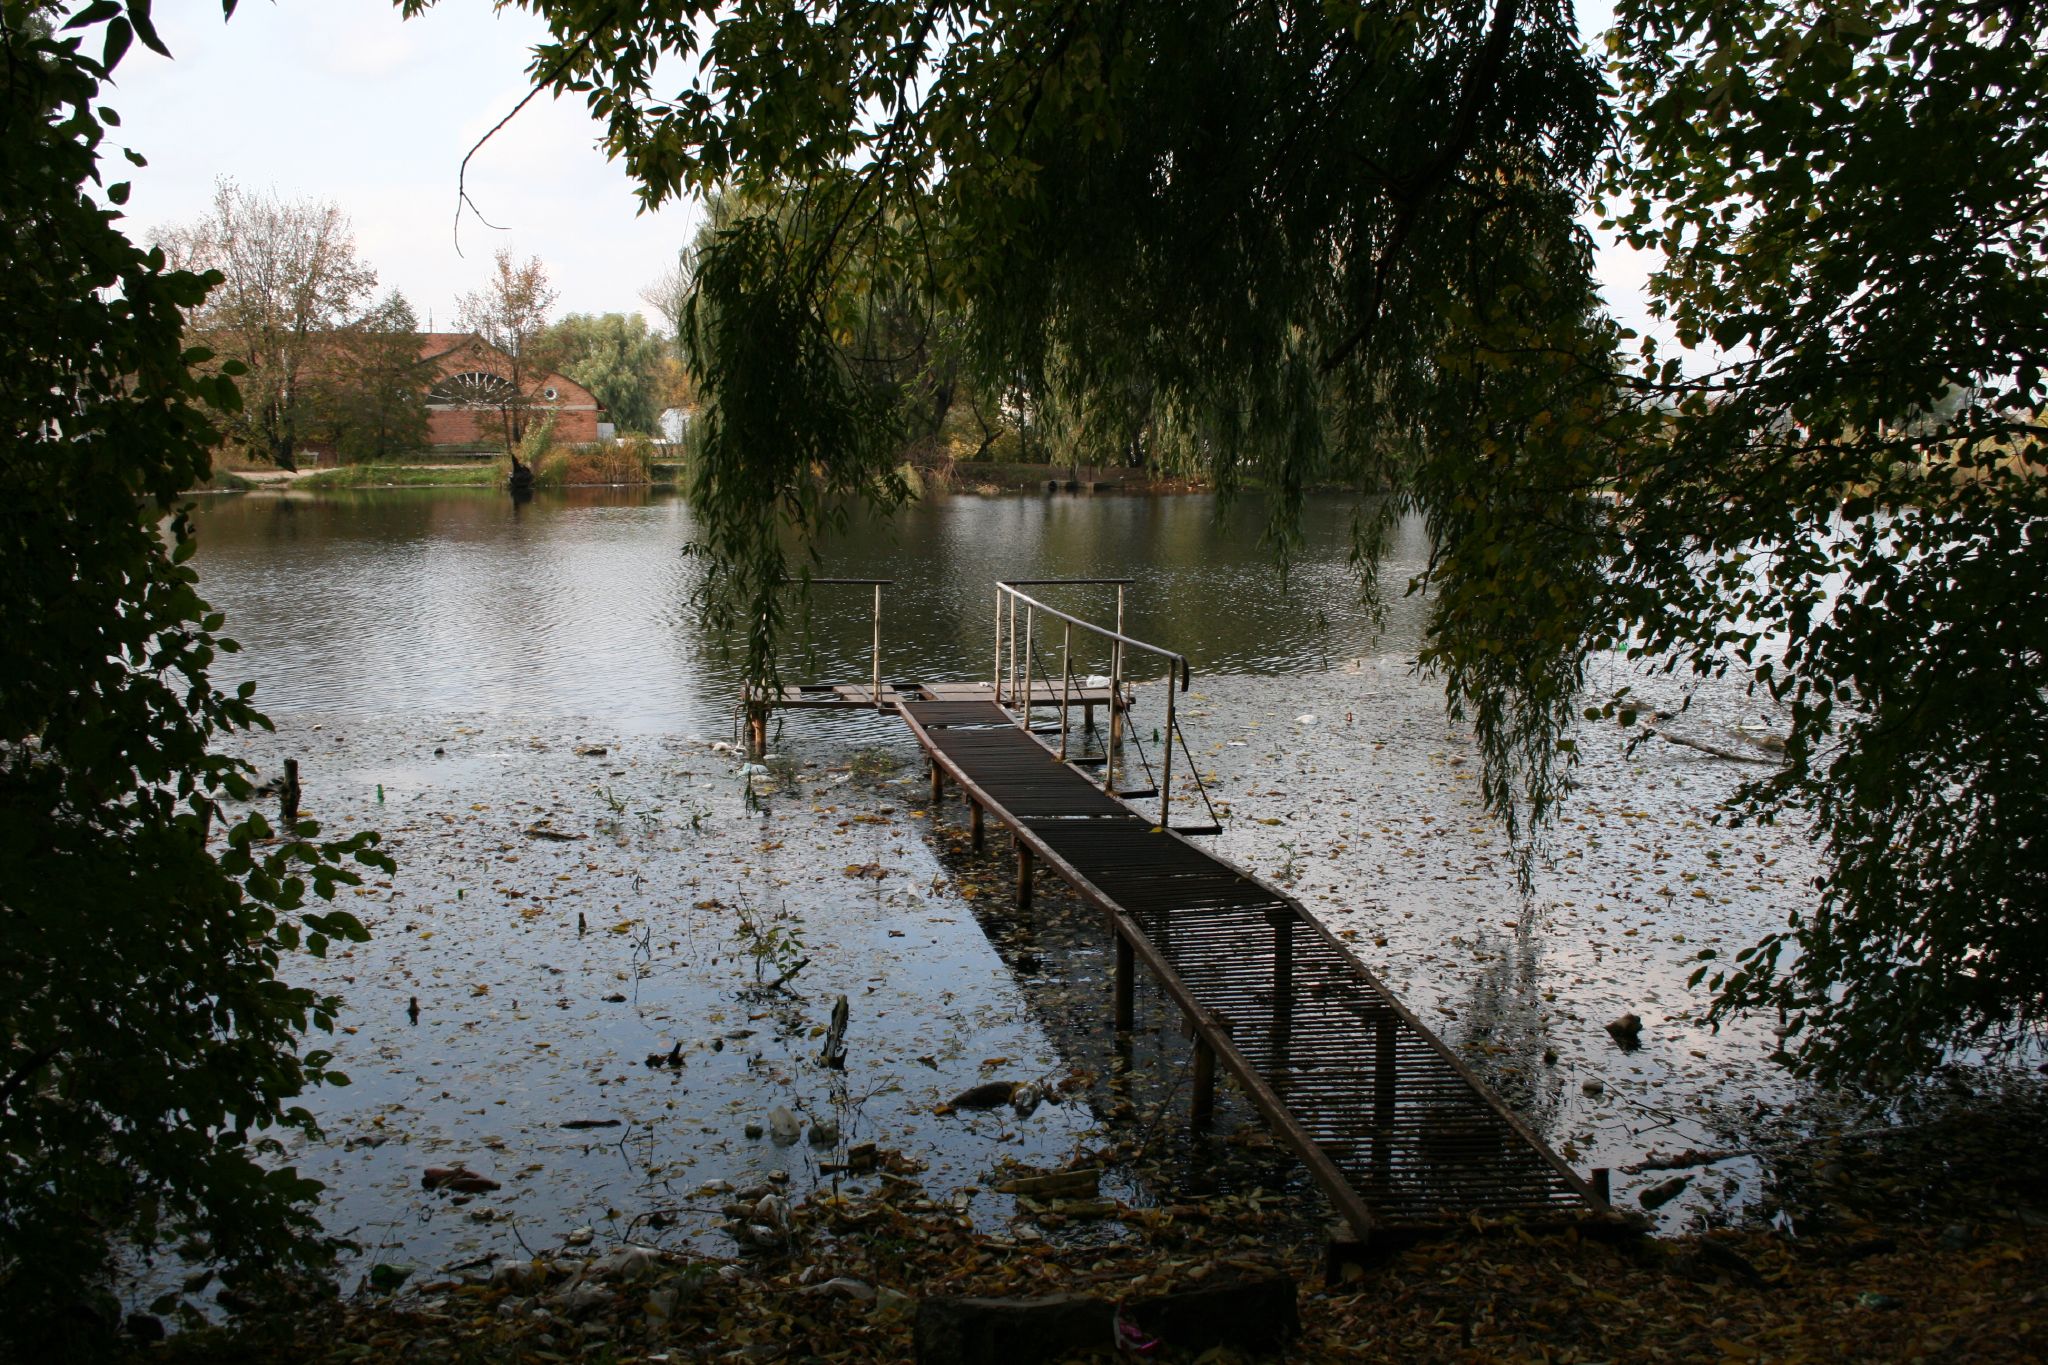 a dock is partially submerged in the water